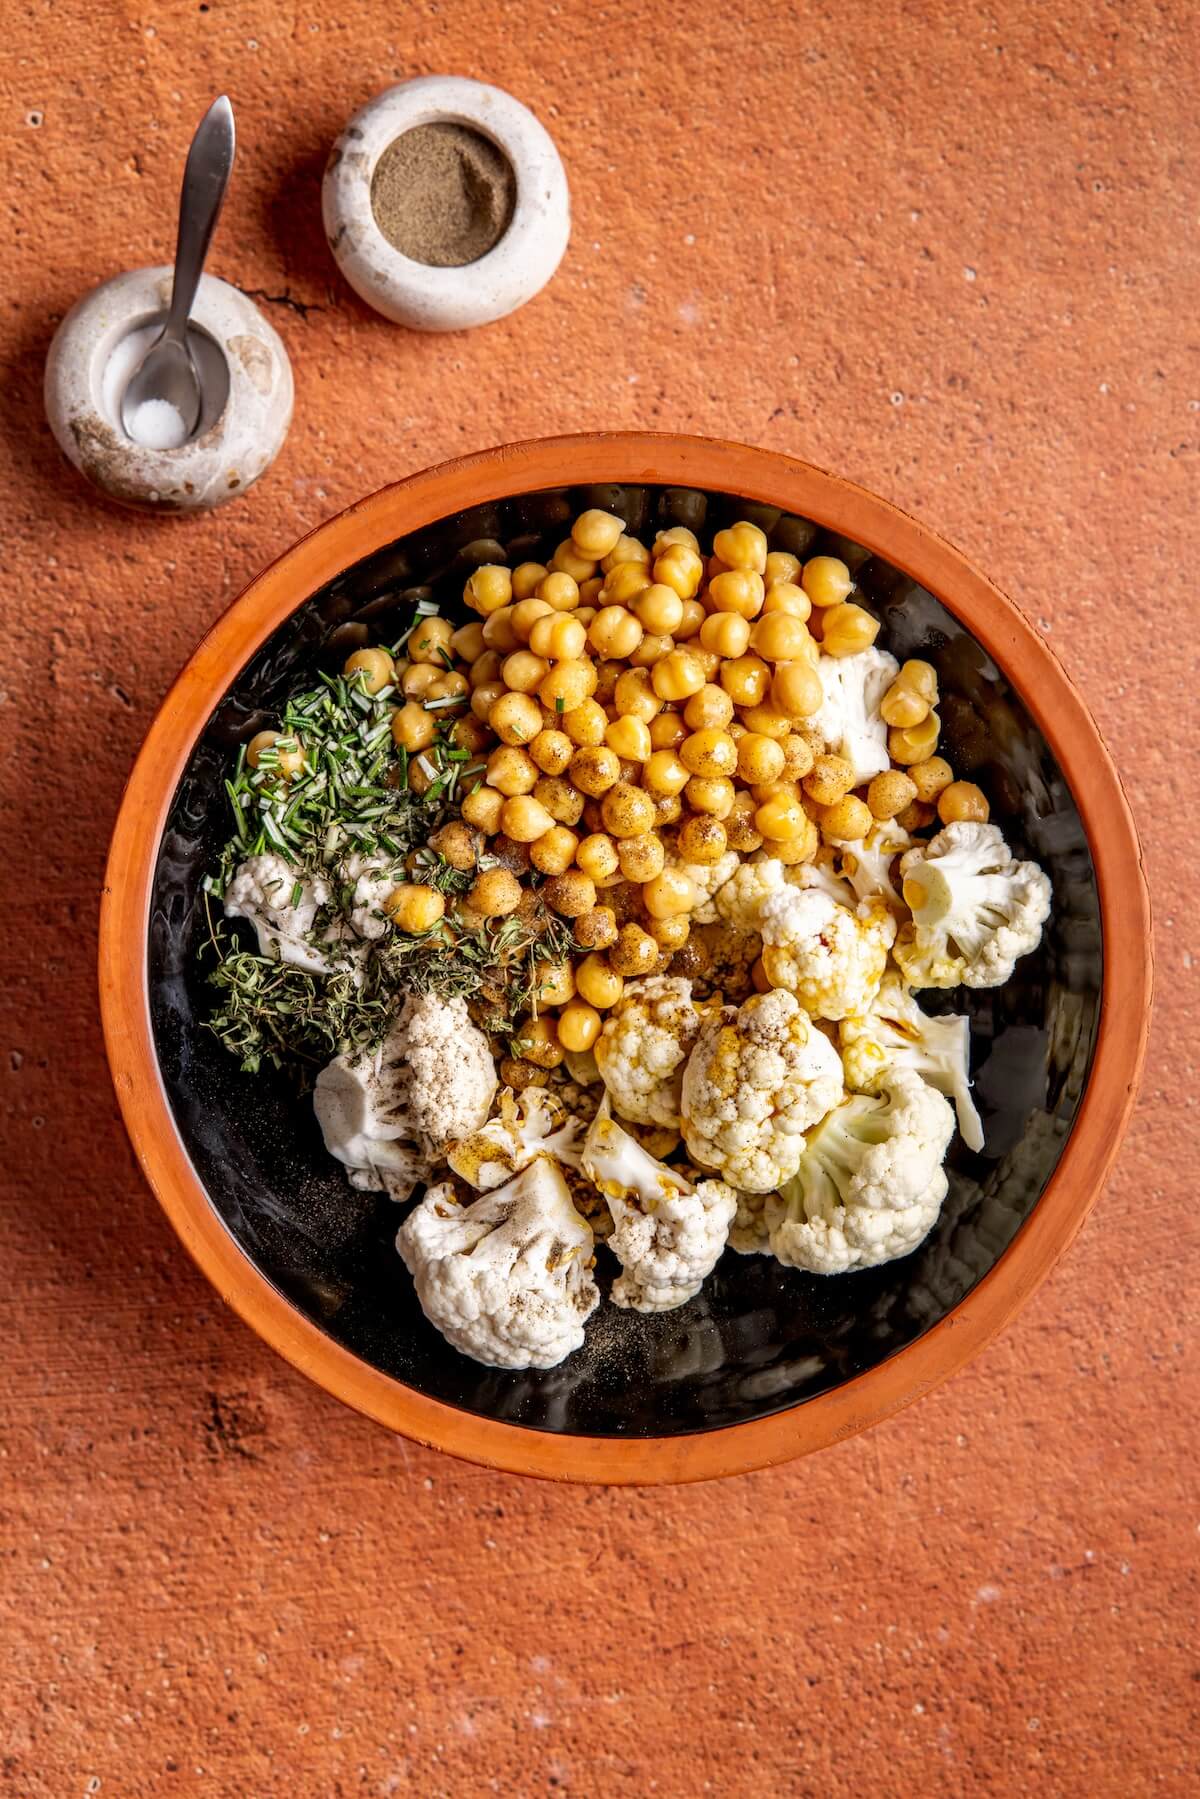 Herb and Maple Roasted Cauliflower with Chickpeas Step 1 - Olivia Adriance